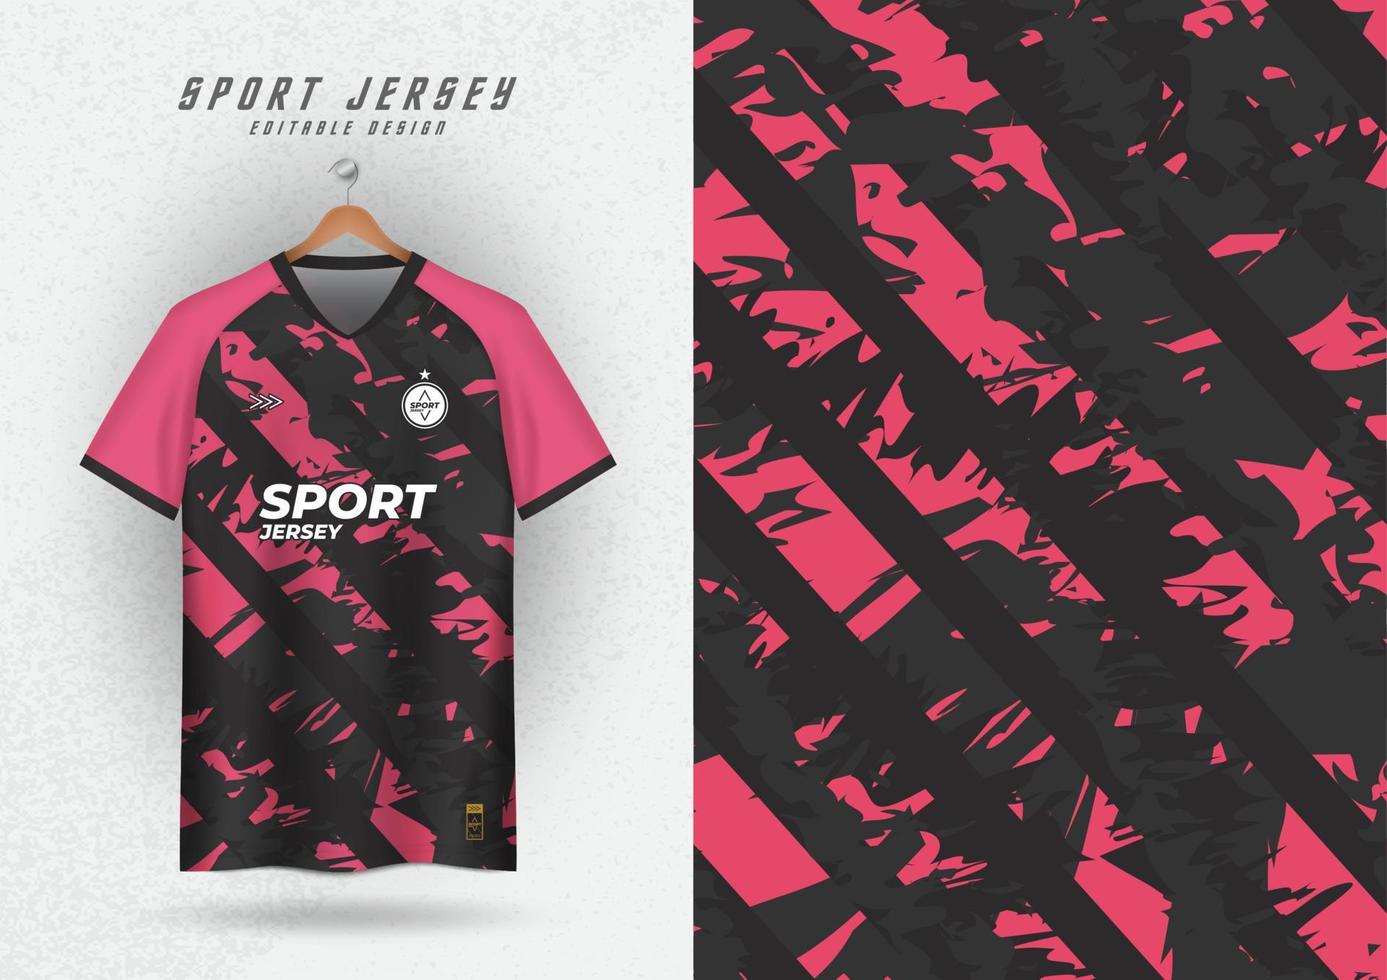 background for sports jersey soccer jersey running jersey racing jersey pattern pink black stripes vector